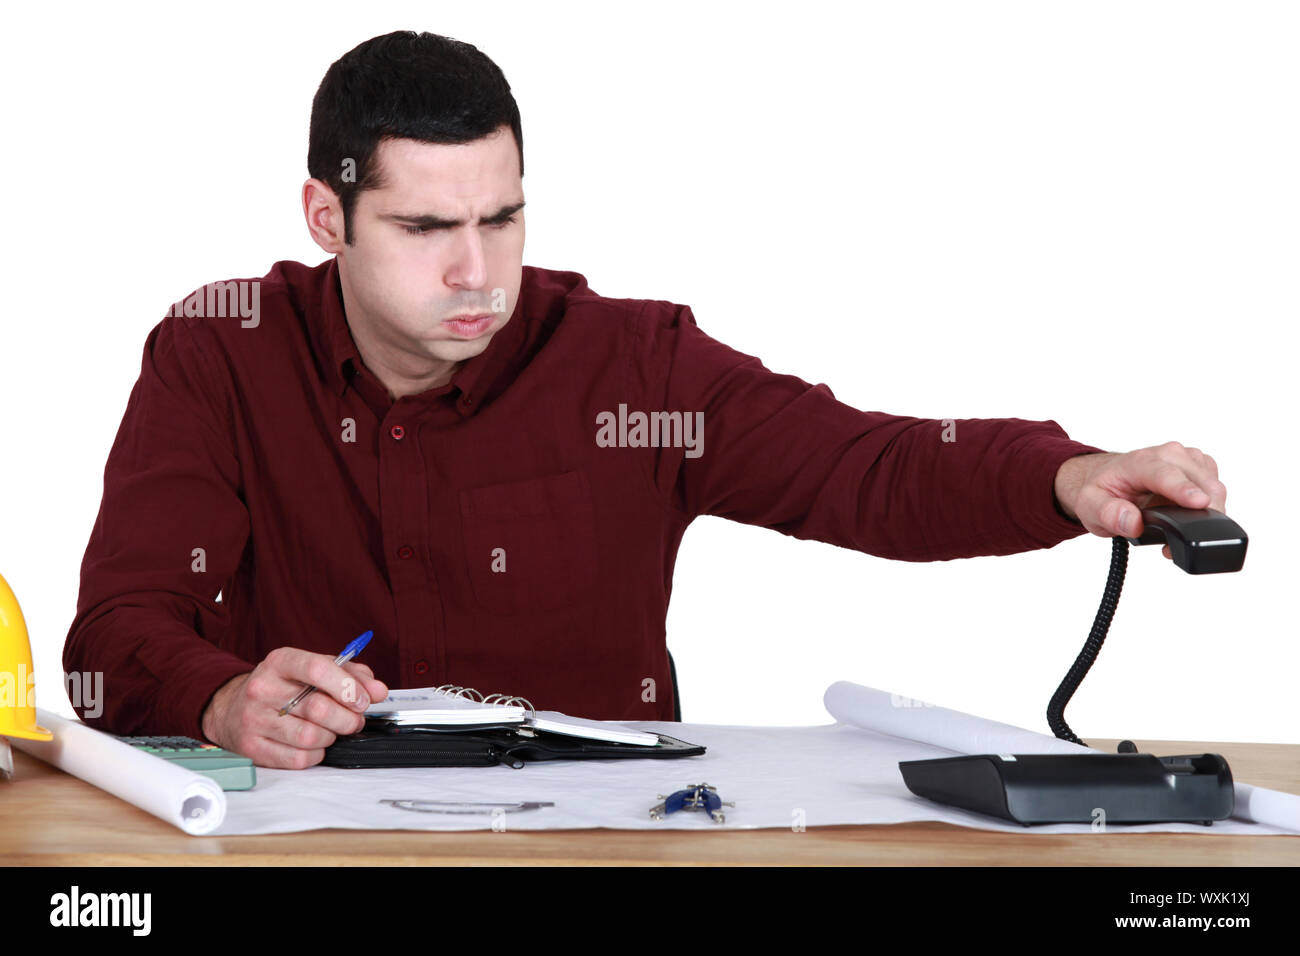 Stressed man hanging up the phone Stock Photo: 274555194 - Alamy